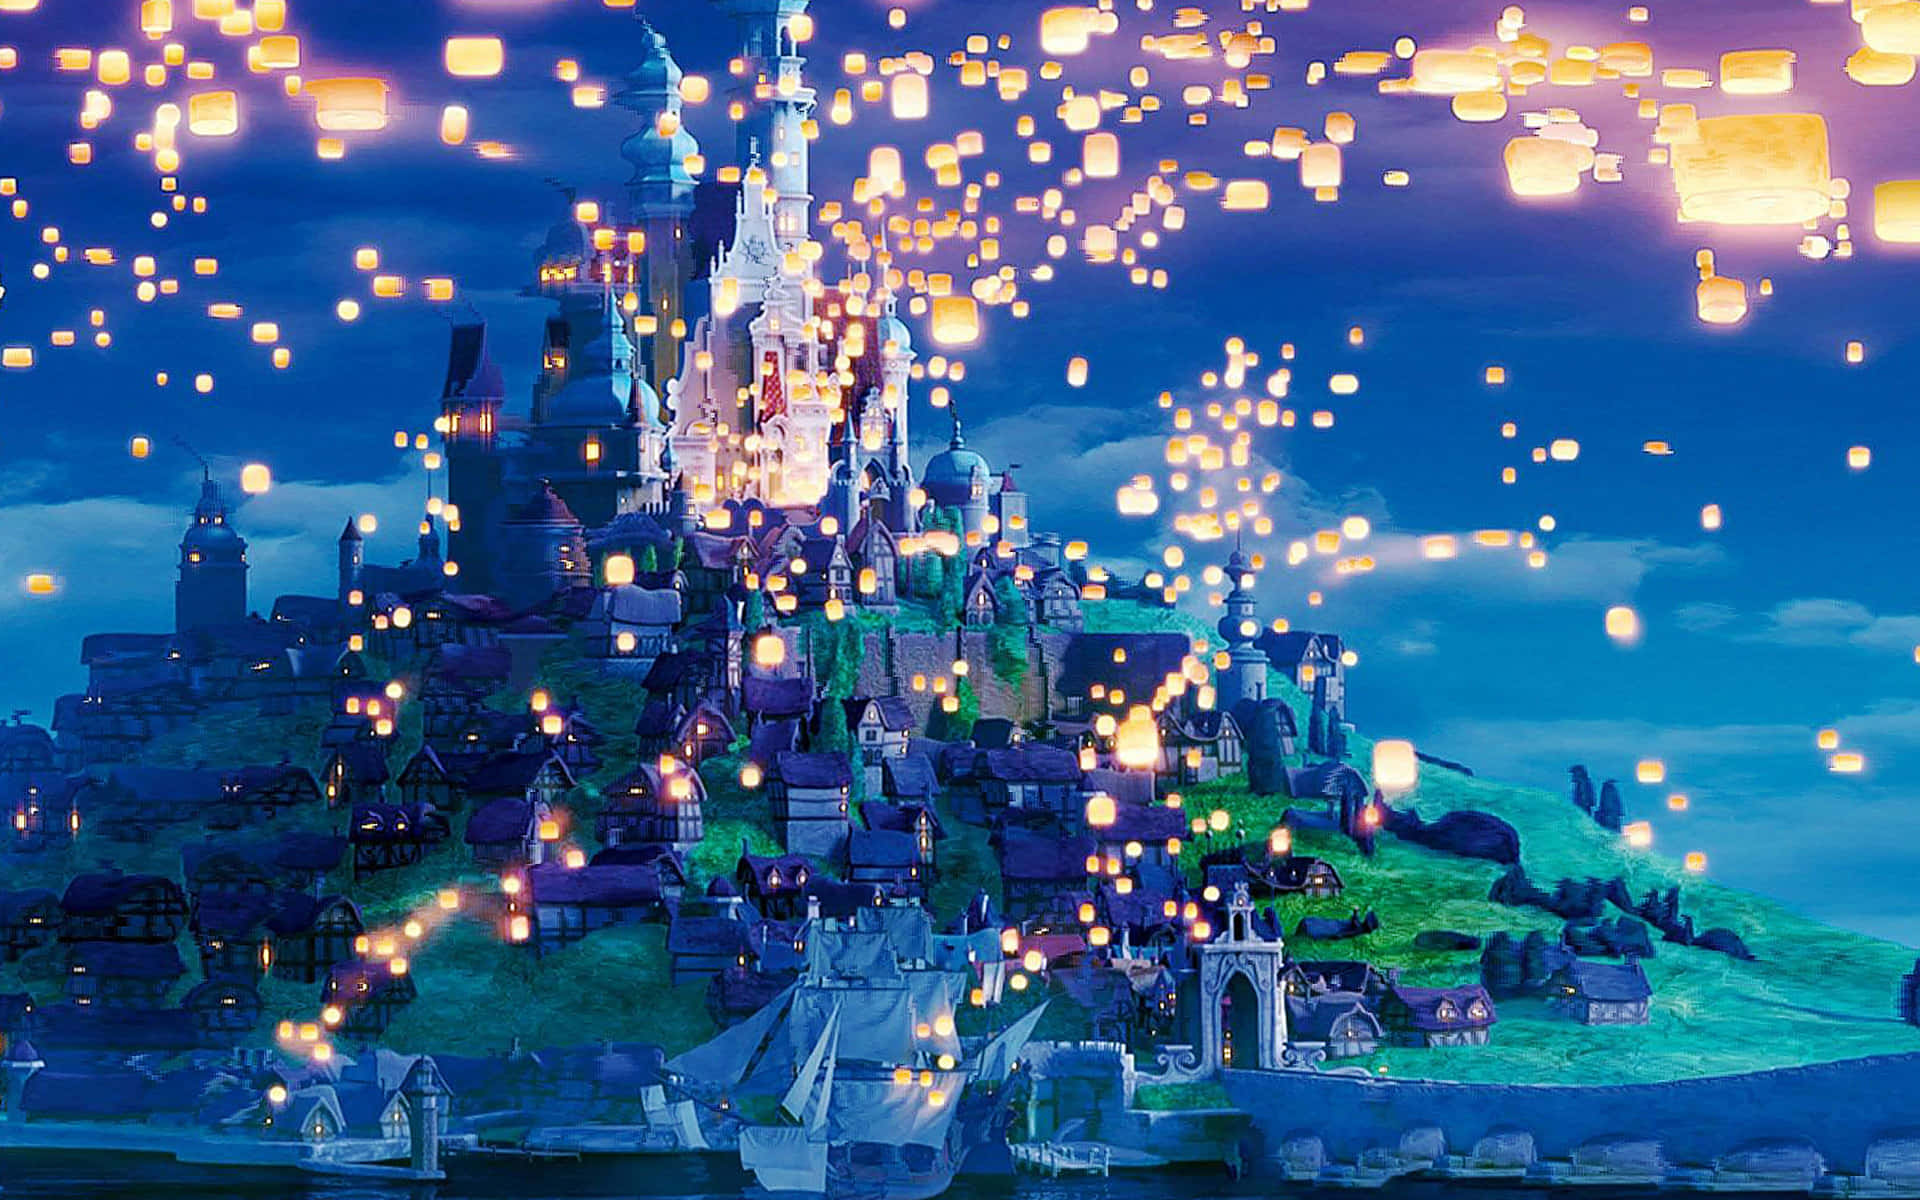 Download Step into the magical world of Disney in amazing 4K